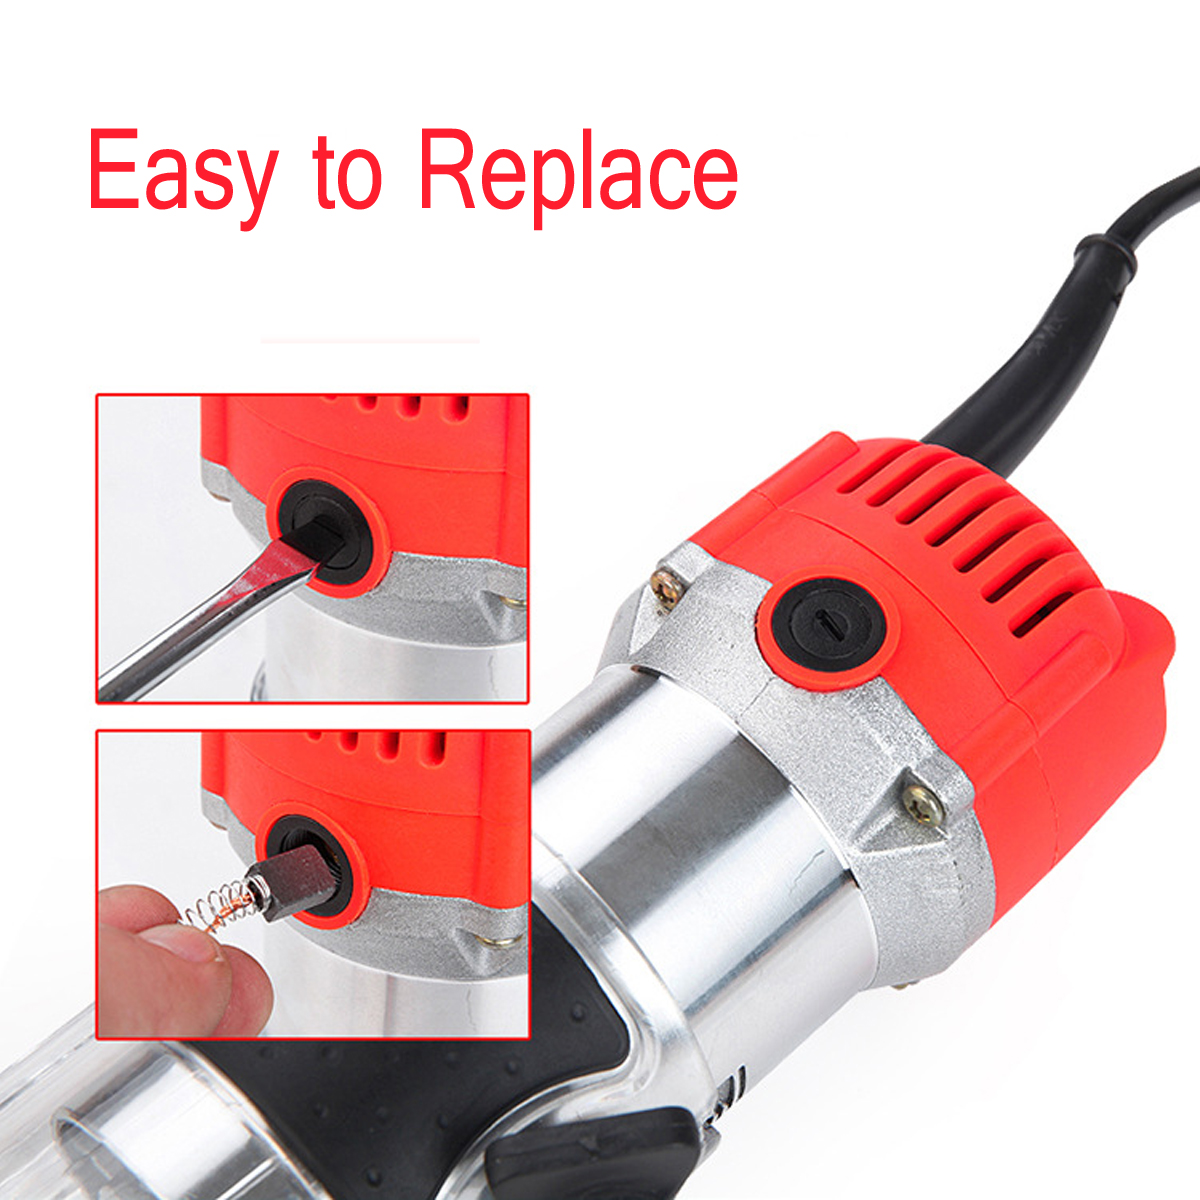 Raitooltrade-220V-680W-30000RPM-Wood-Corded-Electric-Hand-Trimmer-DIY-Tool-Router-635MM-1270211-7